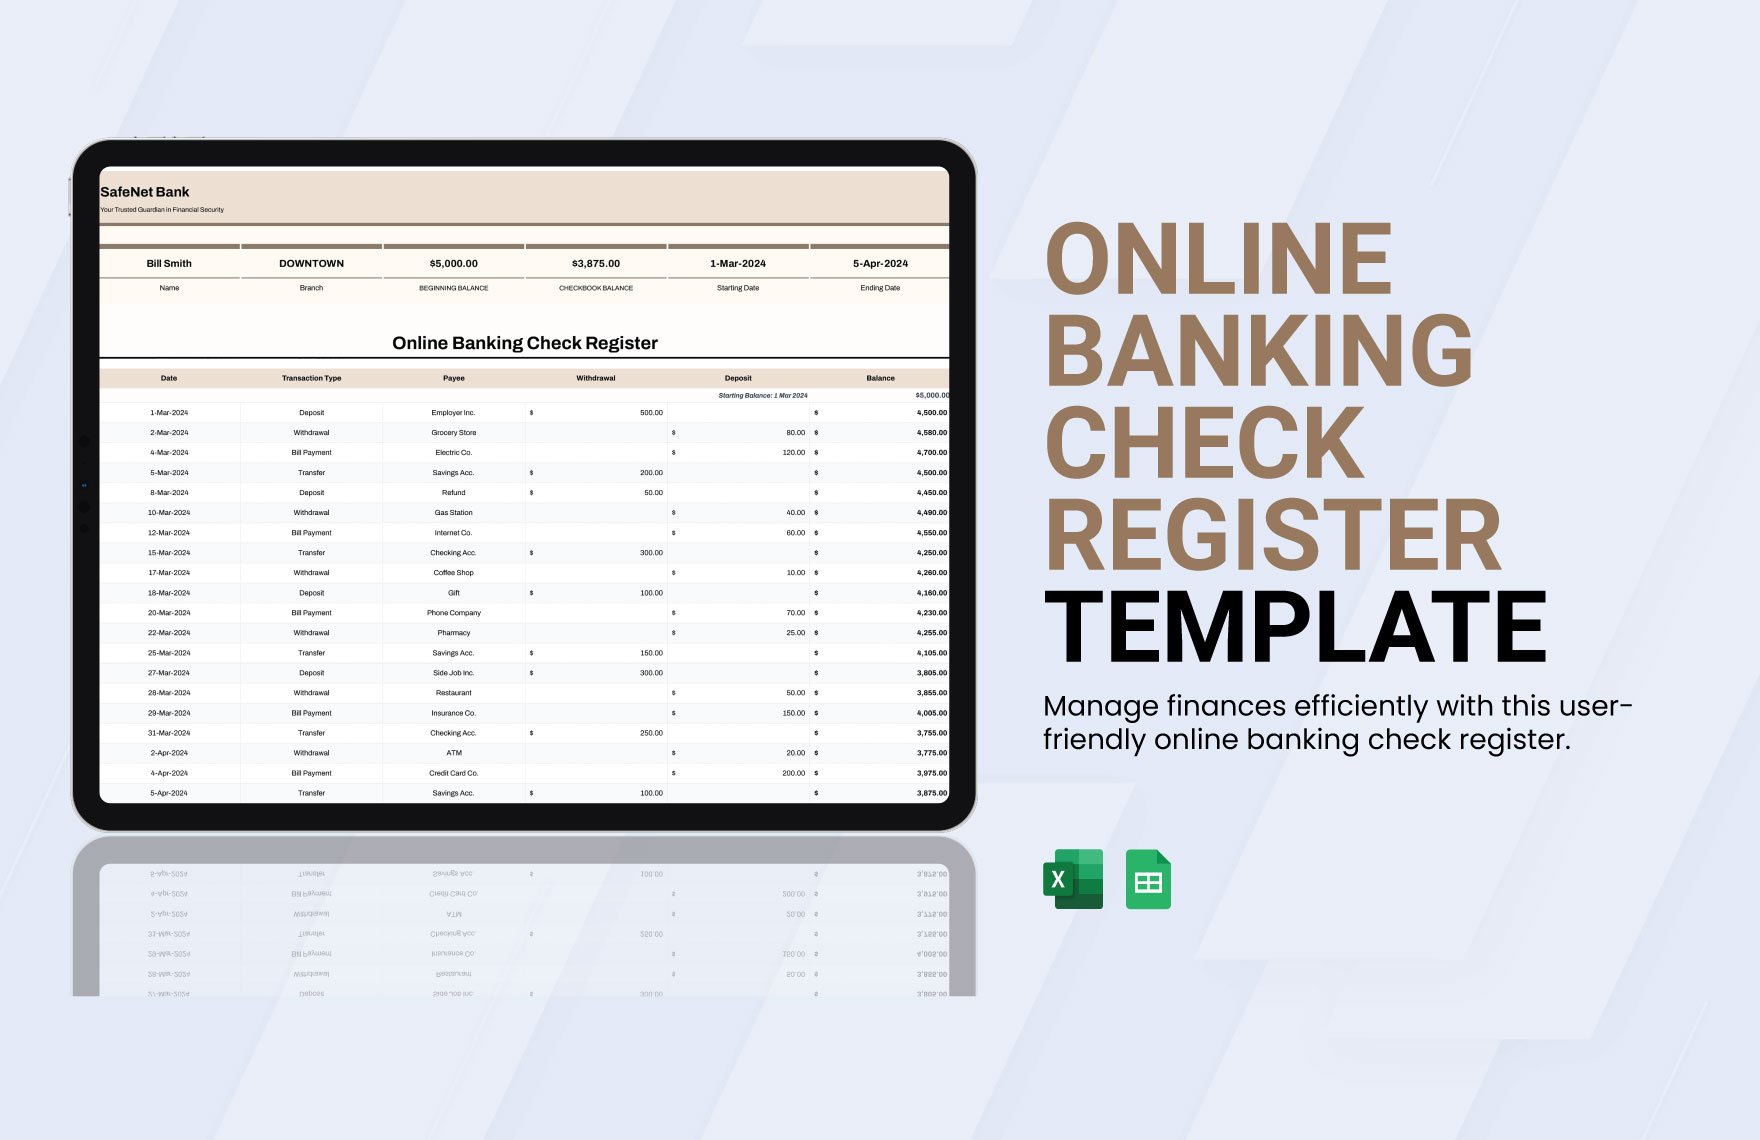 Online Banking Check Register Template